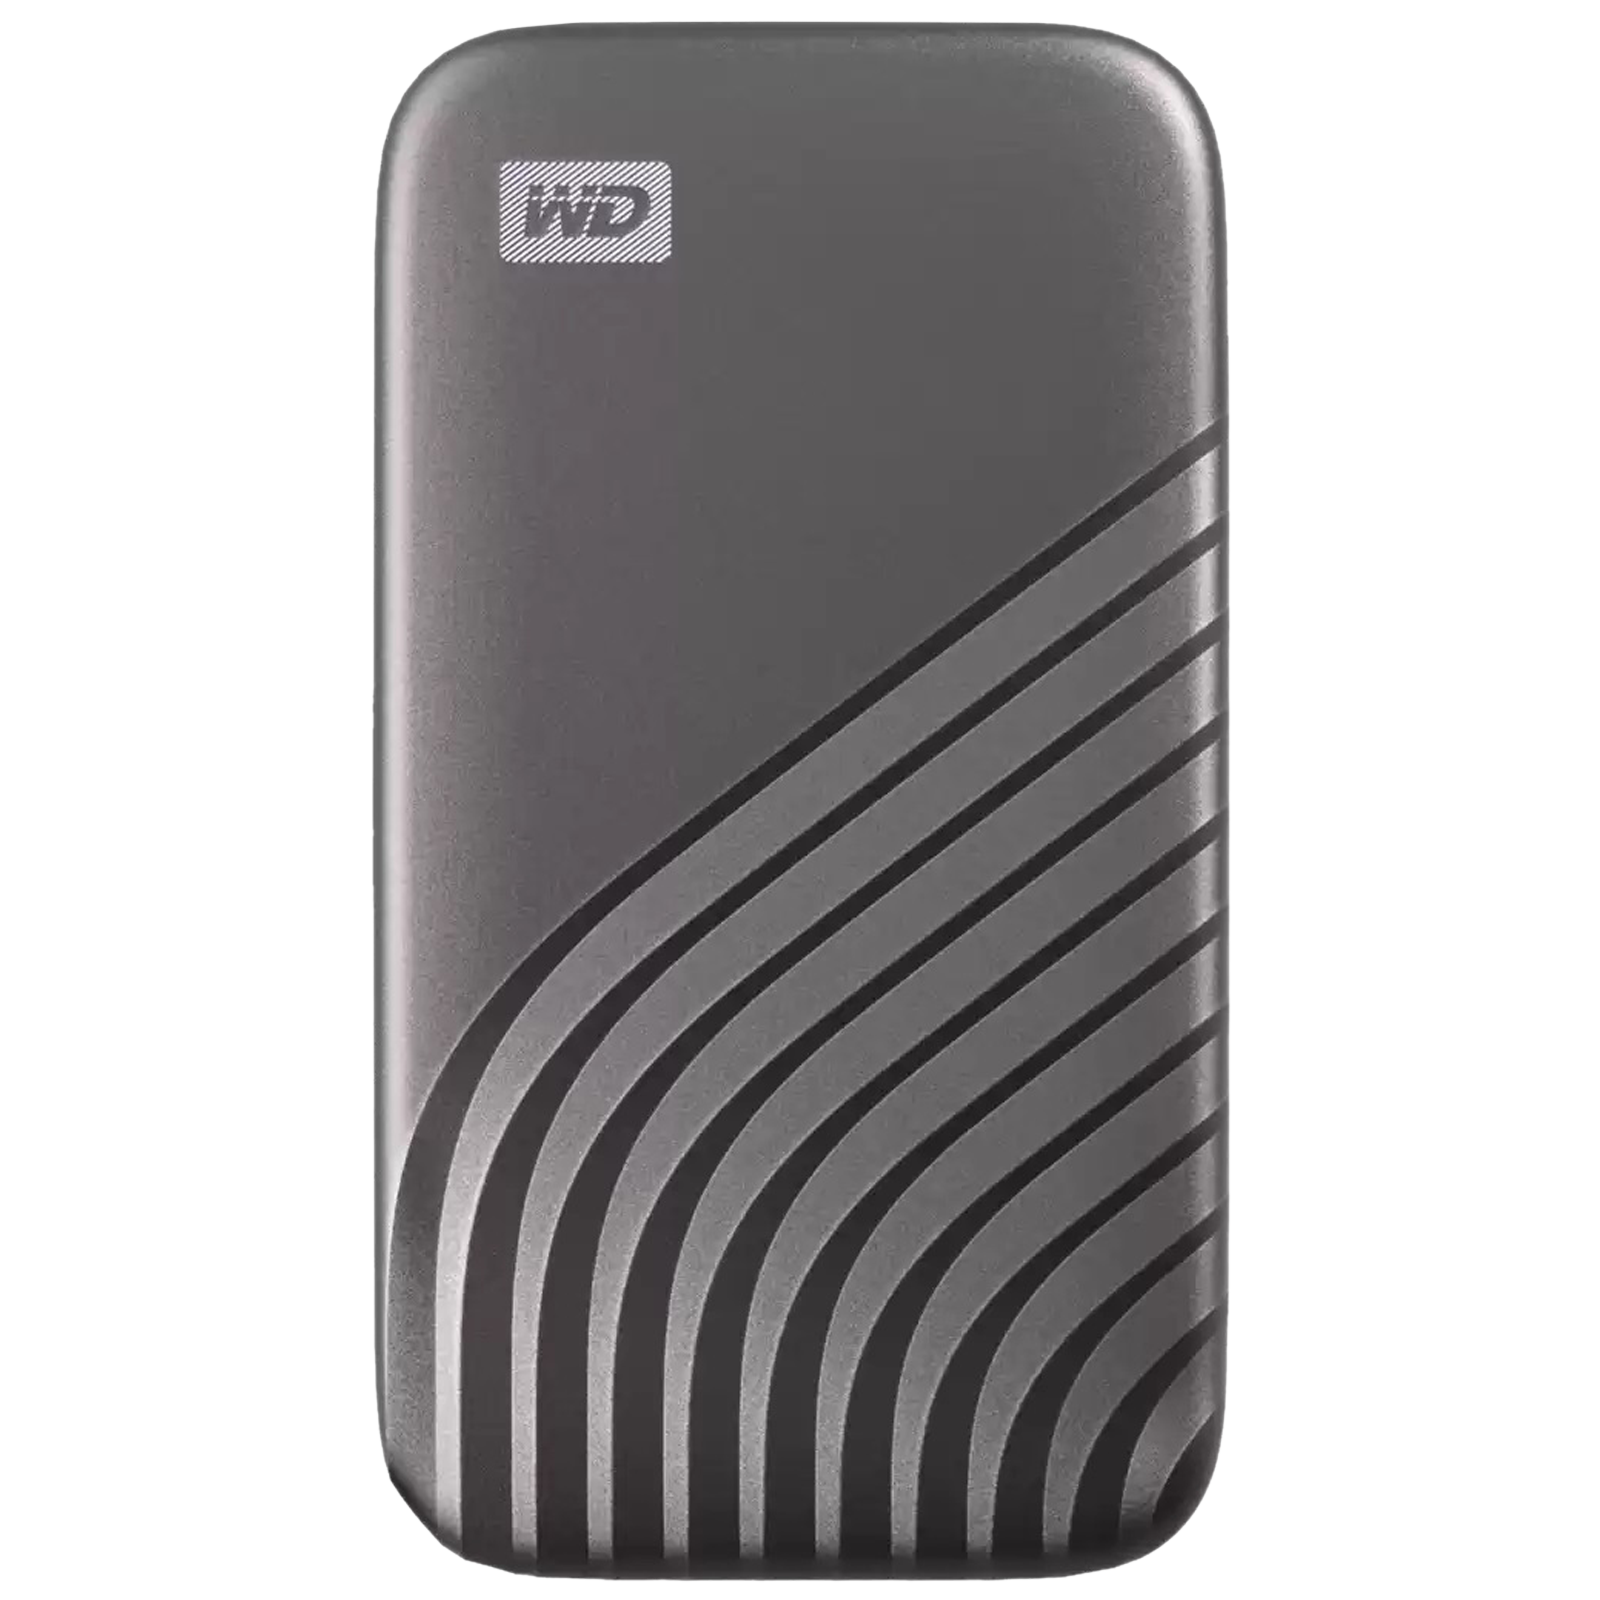 Western Digital My Passport 500GB USB 3.2 (Type-C) Solid State Drive (Password Protection, WDBAGF5000AGY-WESN, Grey)